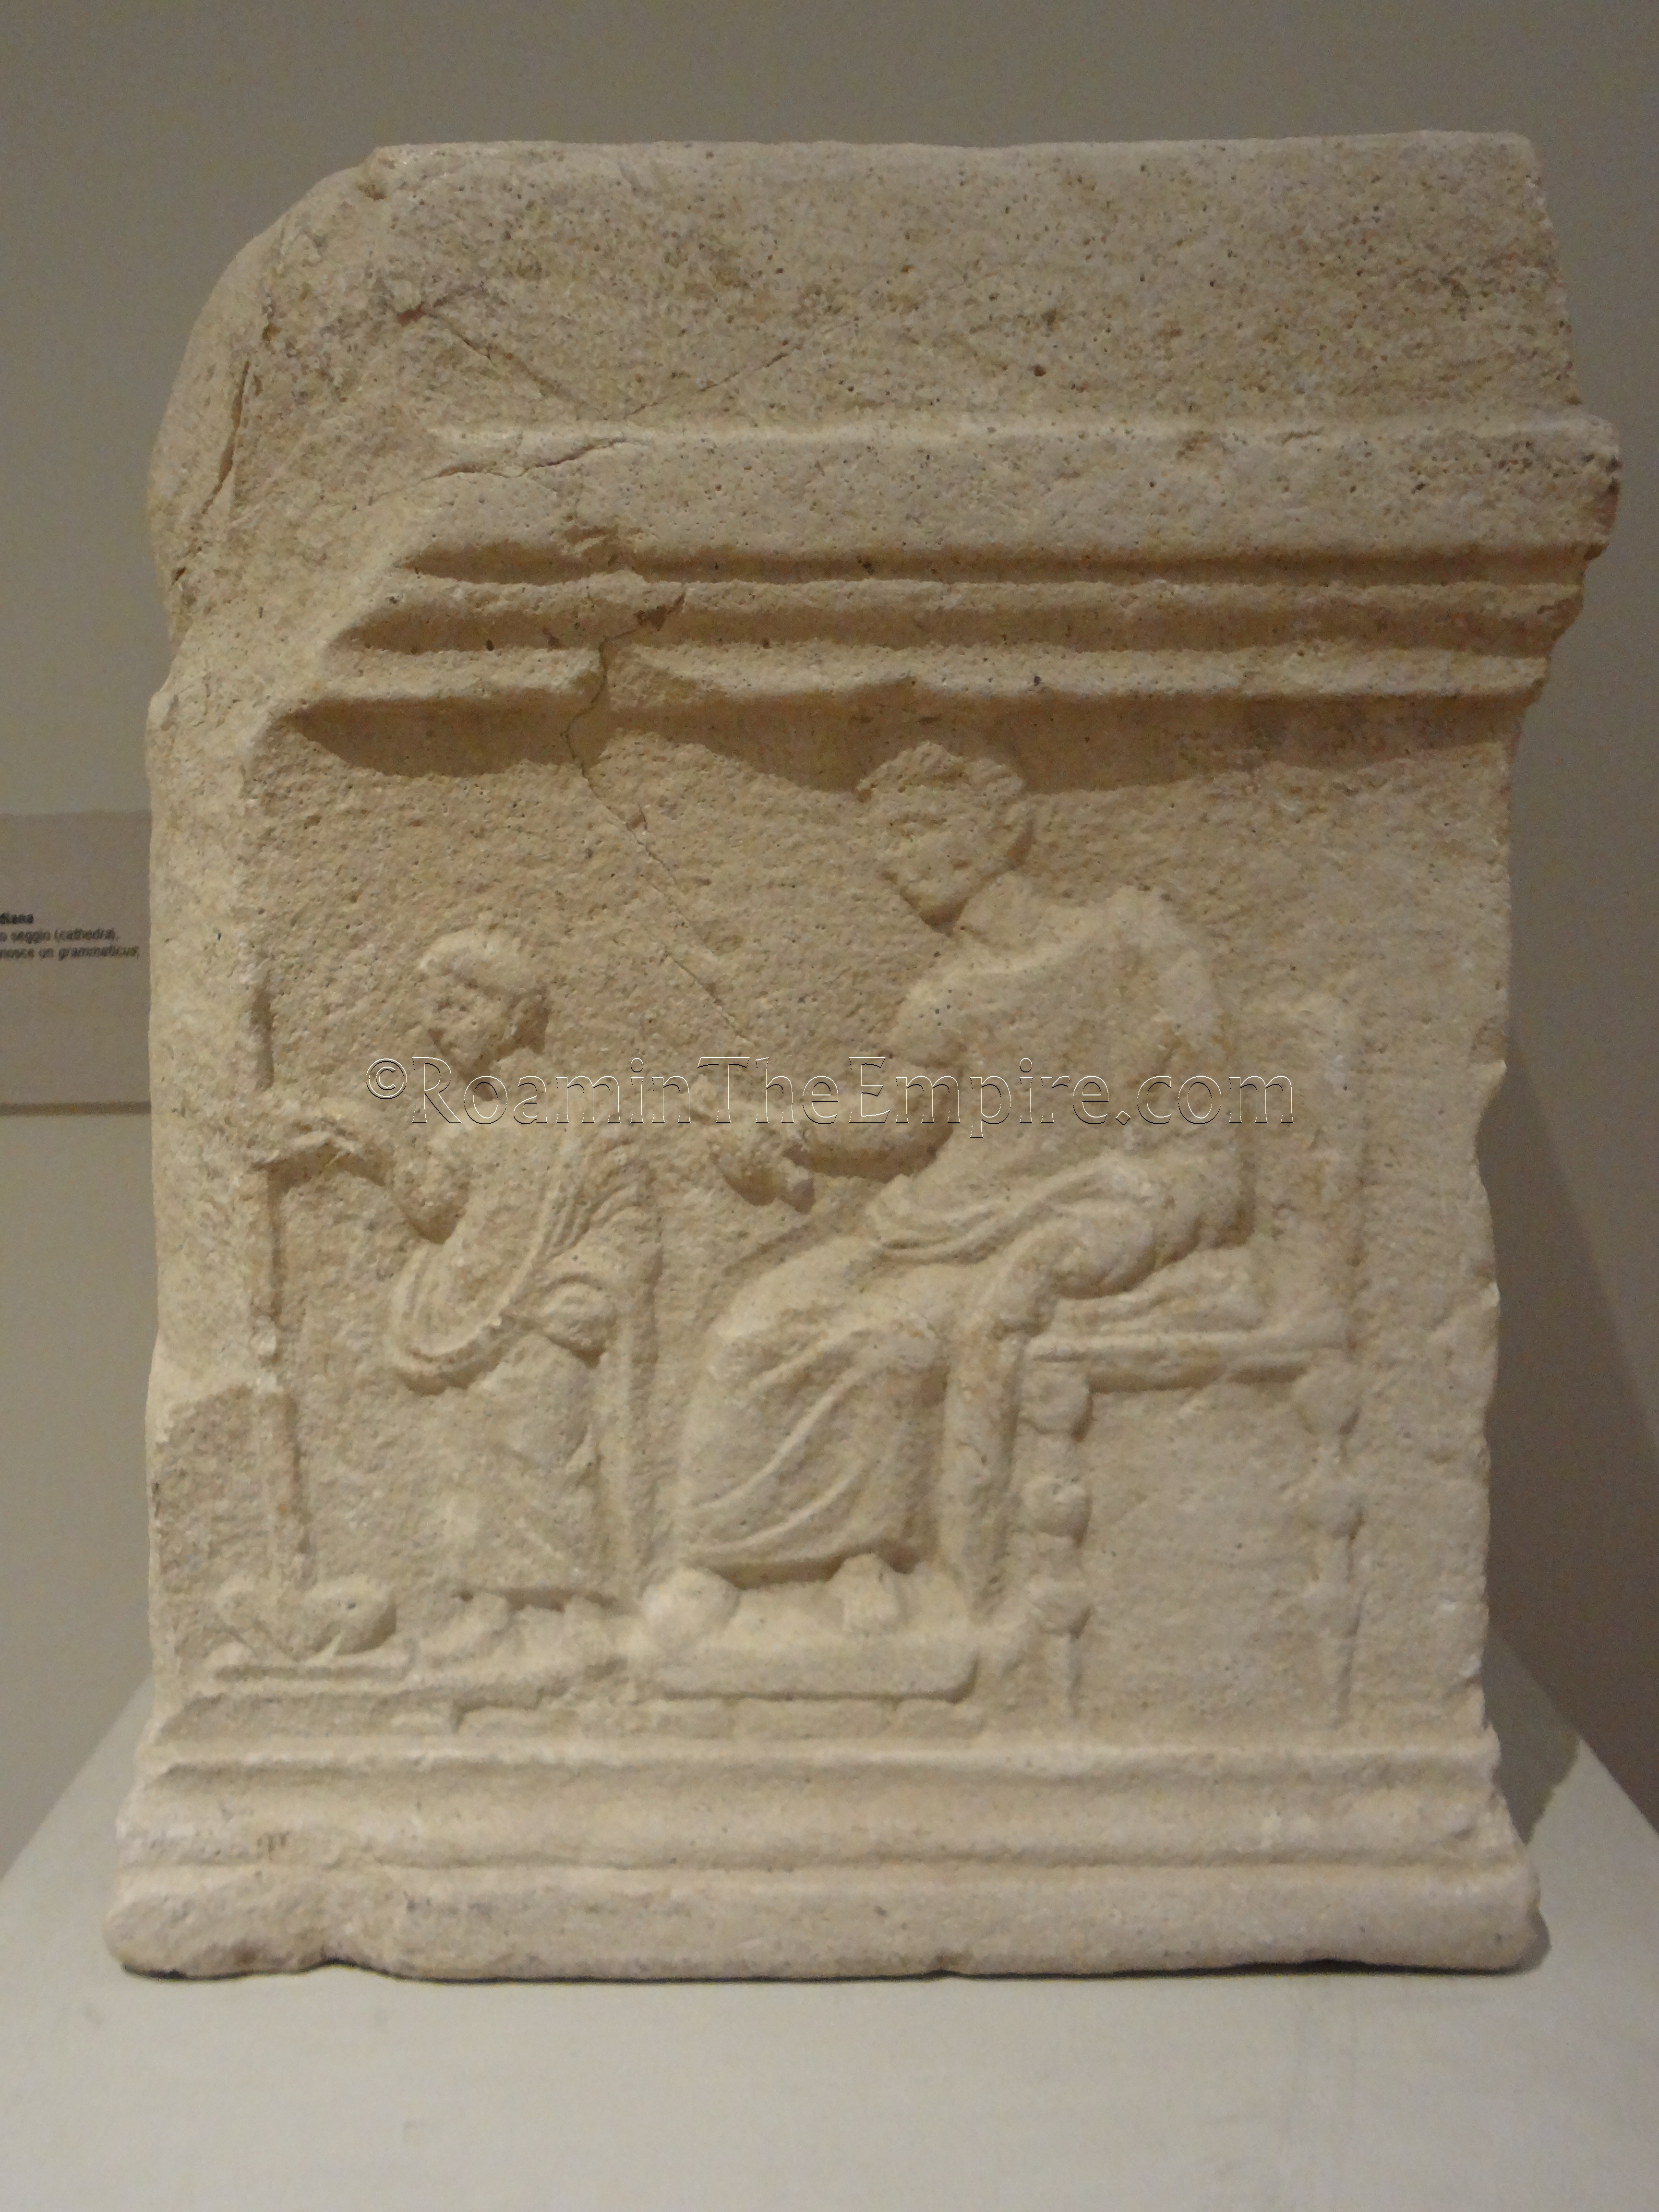 Relief of a school scene with a grammaticus watching over a child. In the Museo della Città, dated to the 1st century CE.